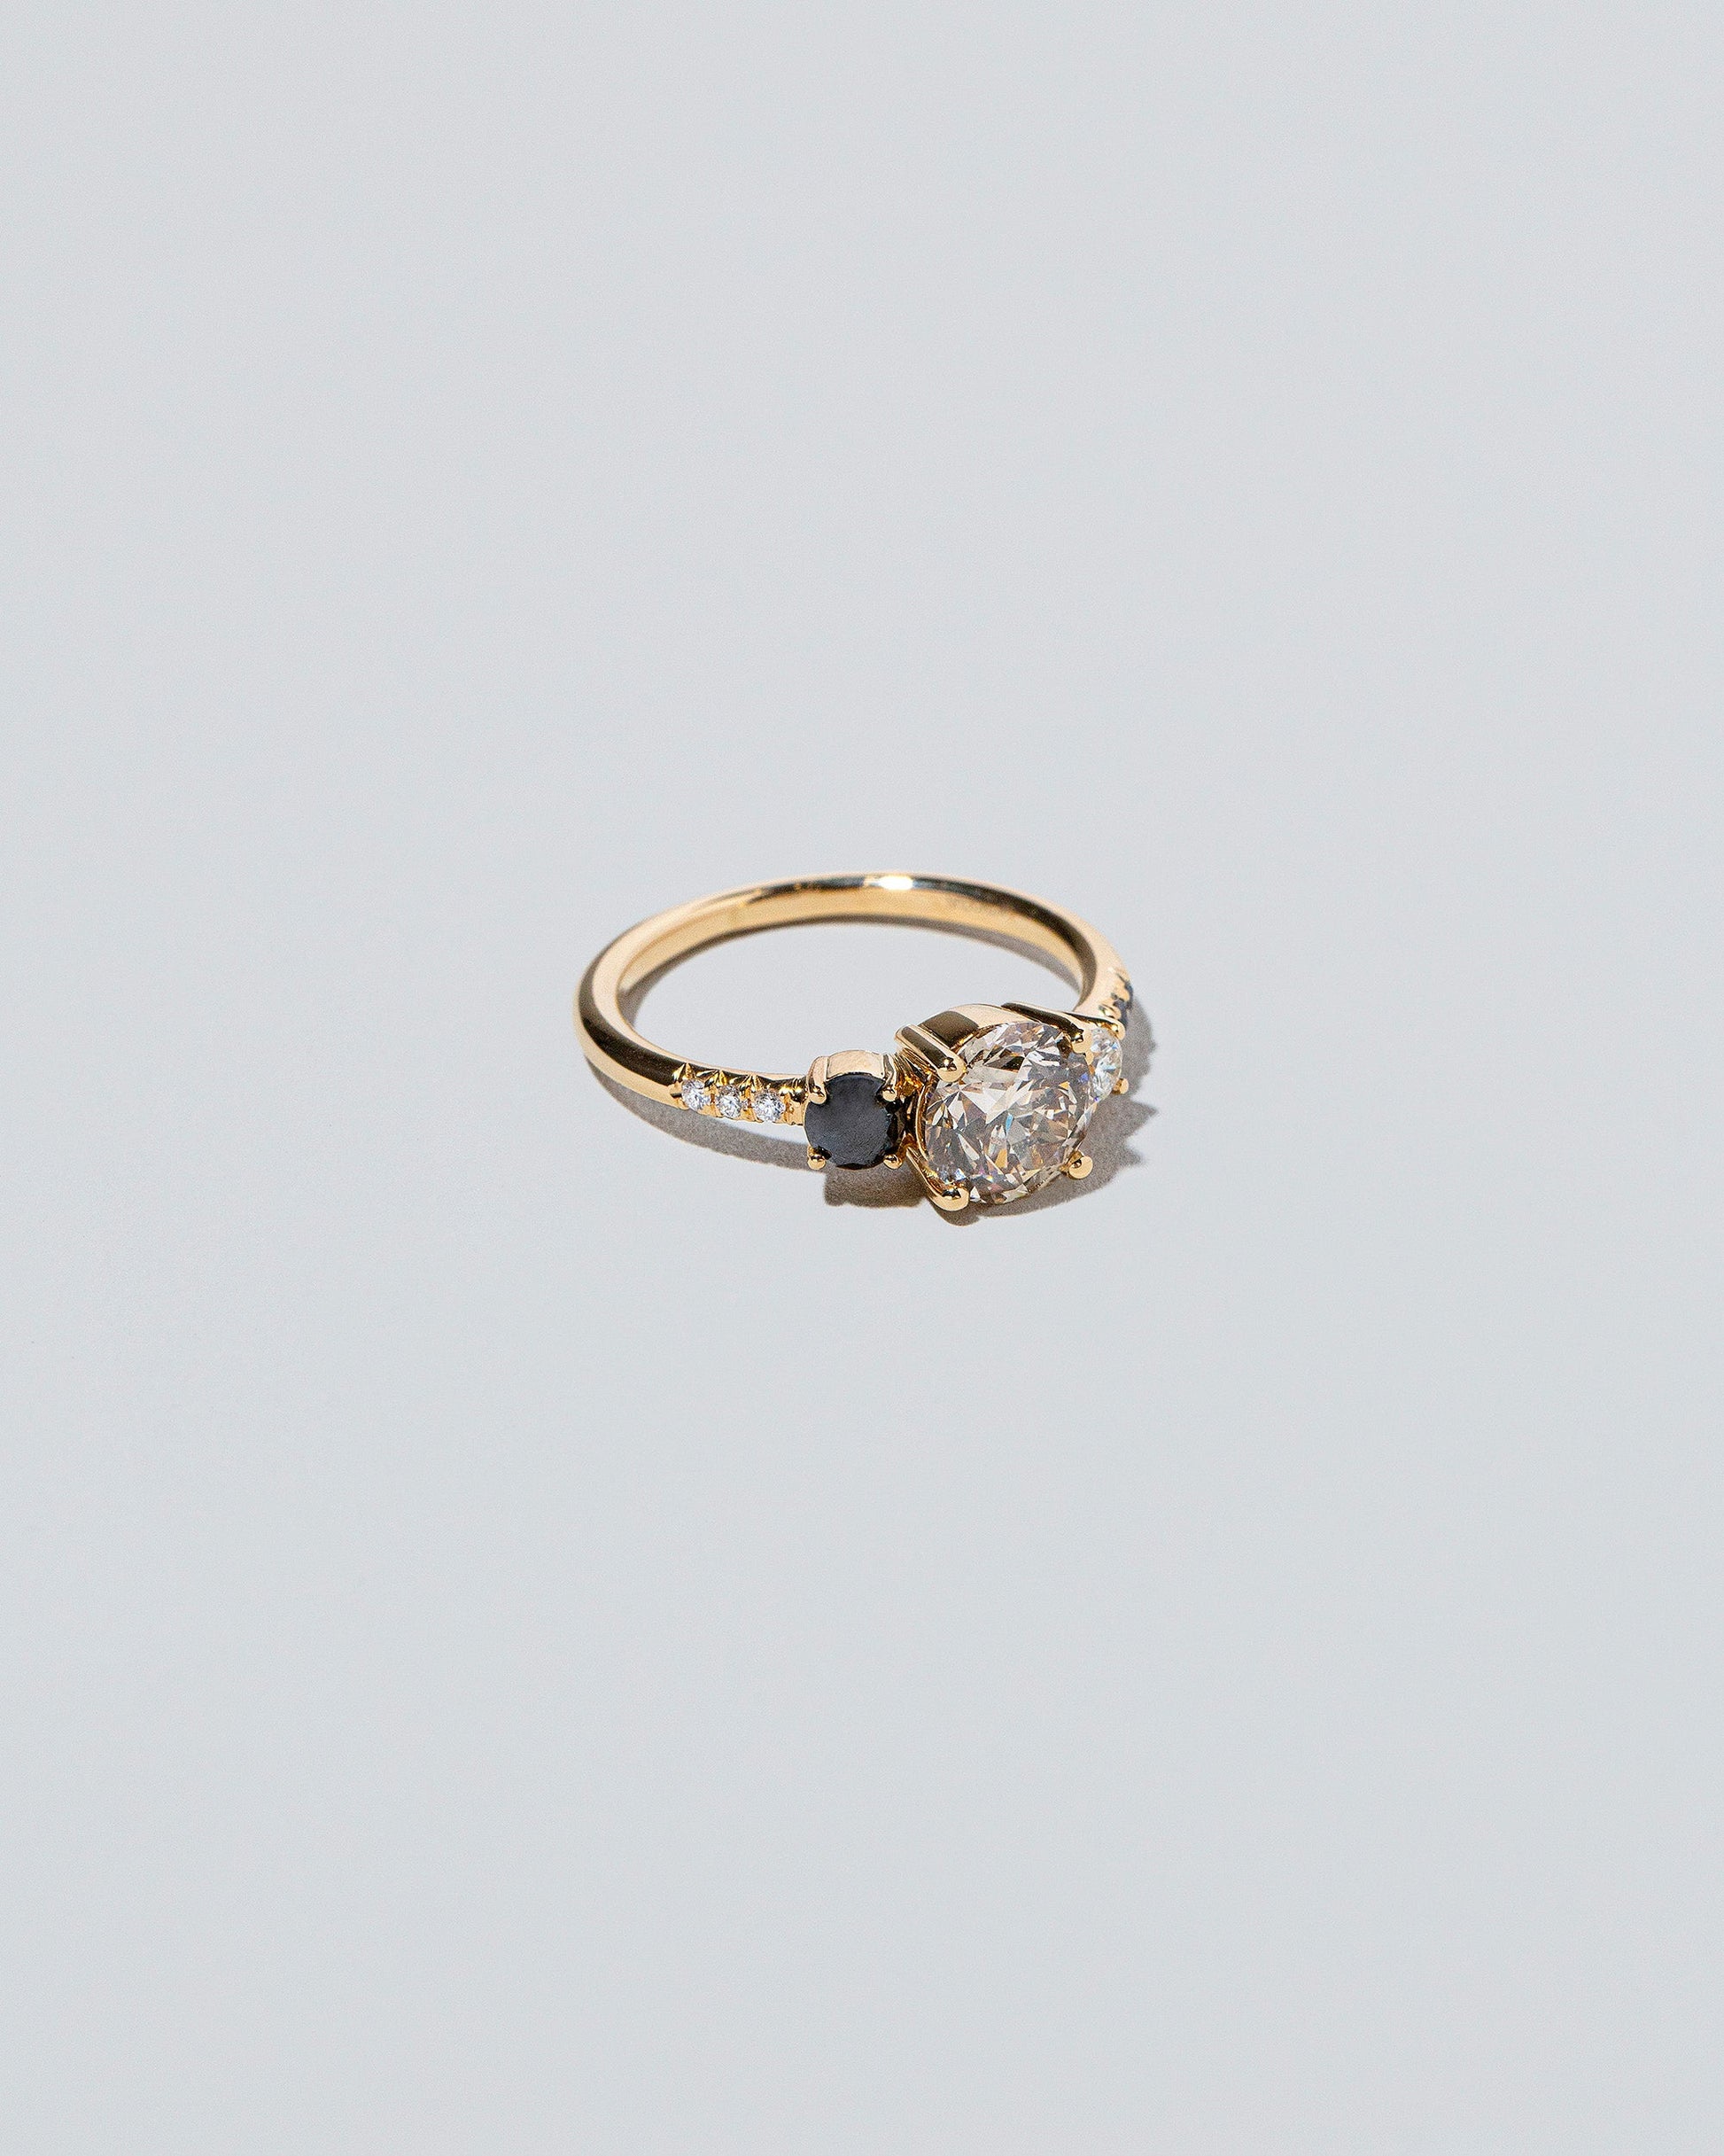 Orion Ring - Champagne Diamond on light color background.